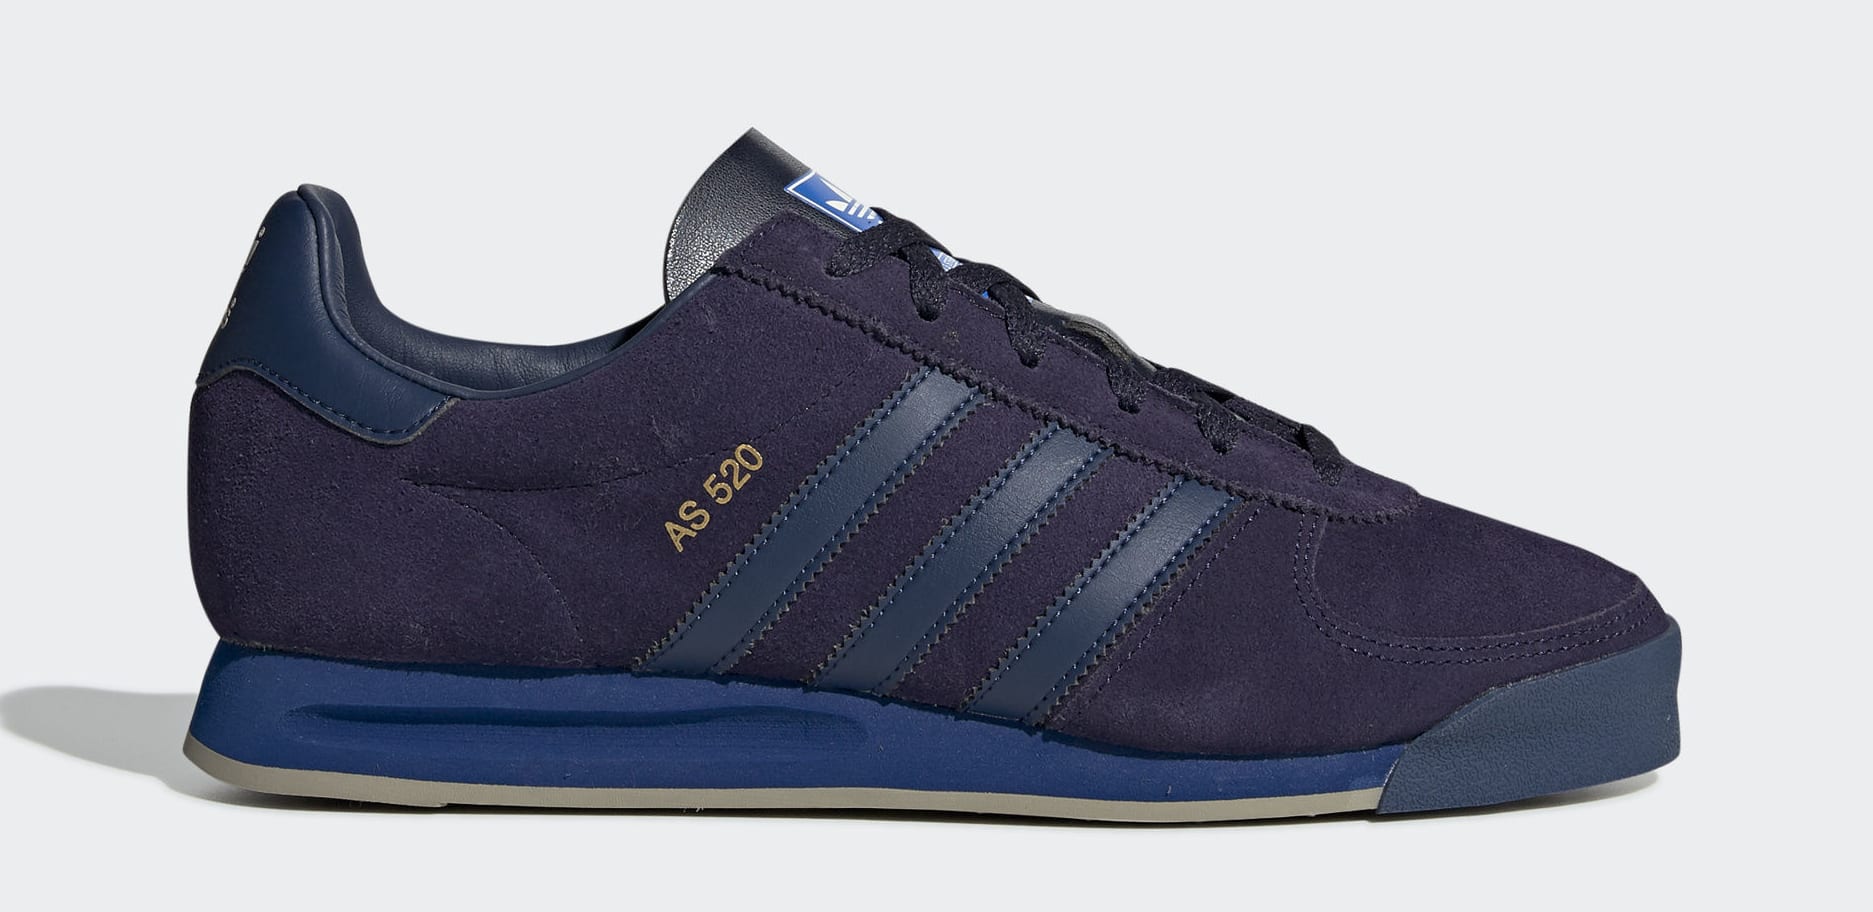 Adidas AS 520 Spezial Lateral F35711